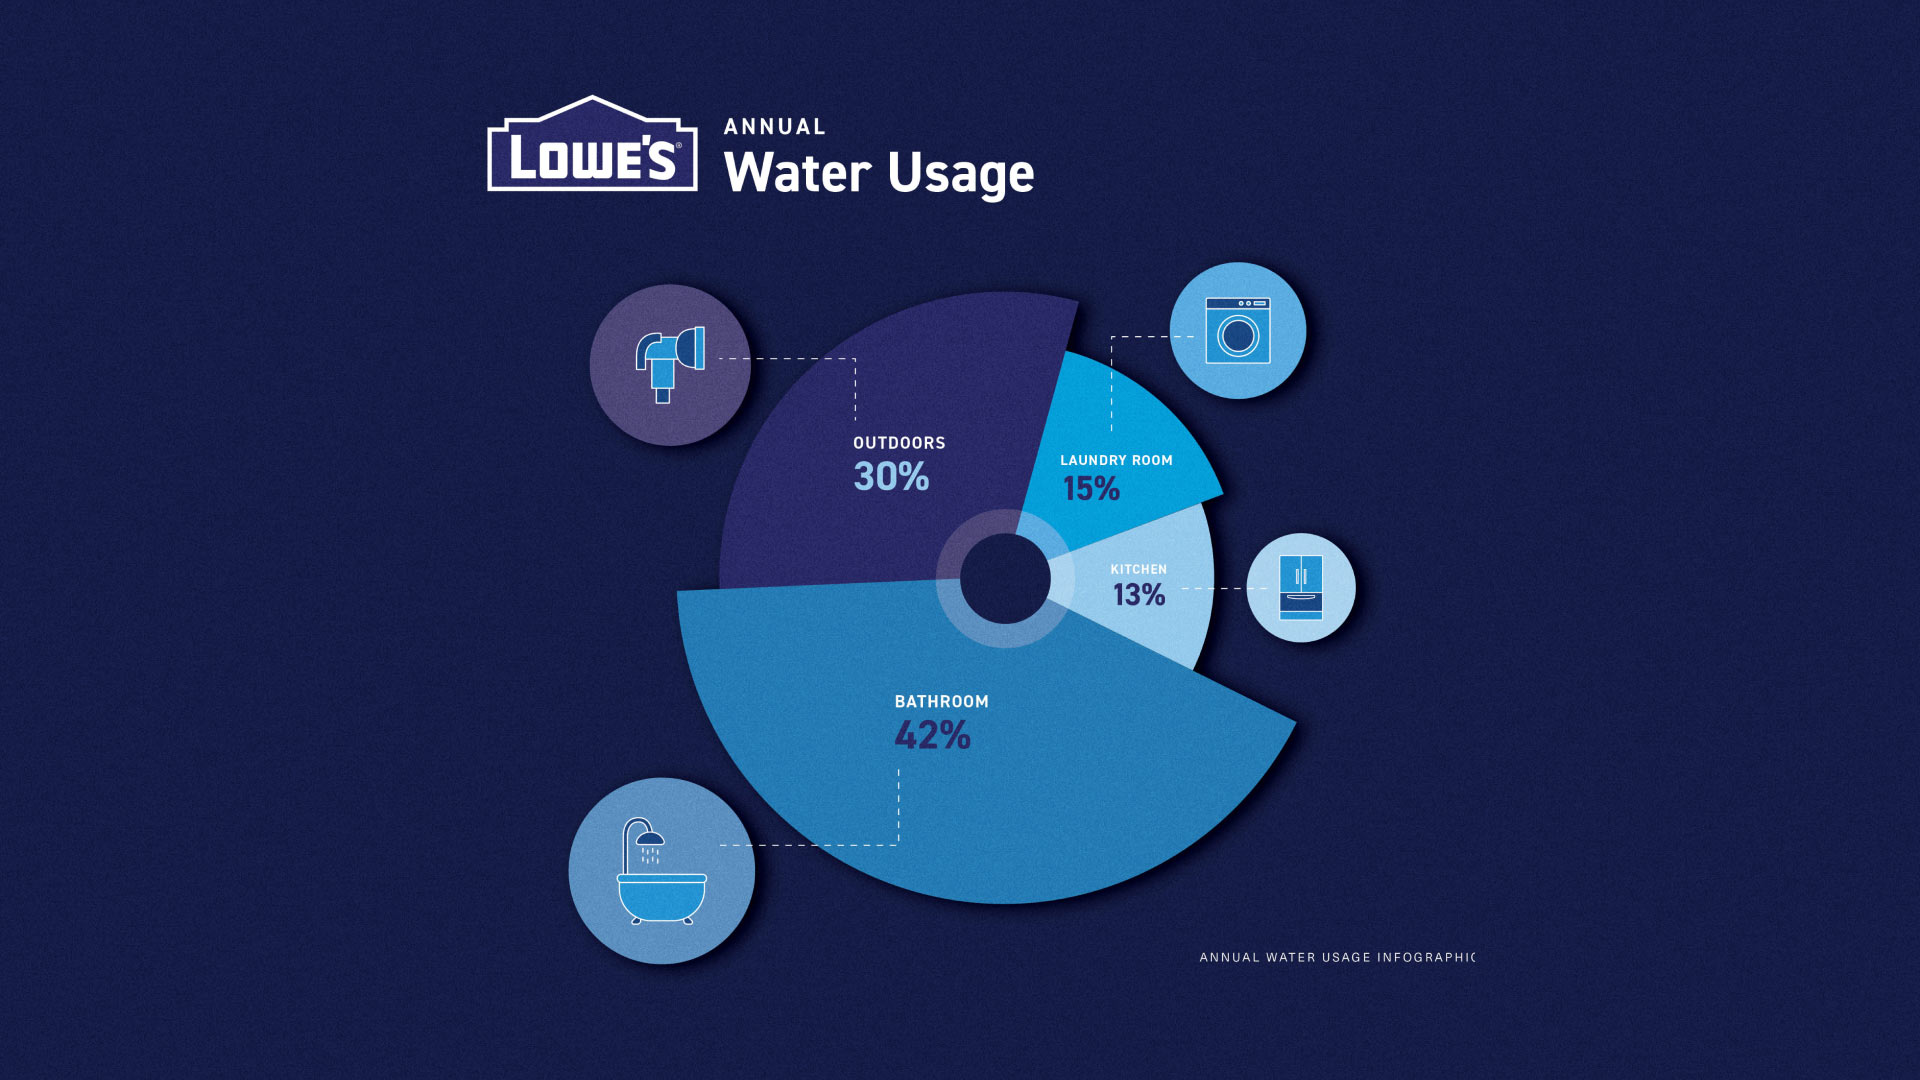 Lowe's infographic showing water usage